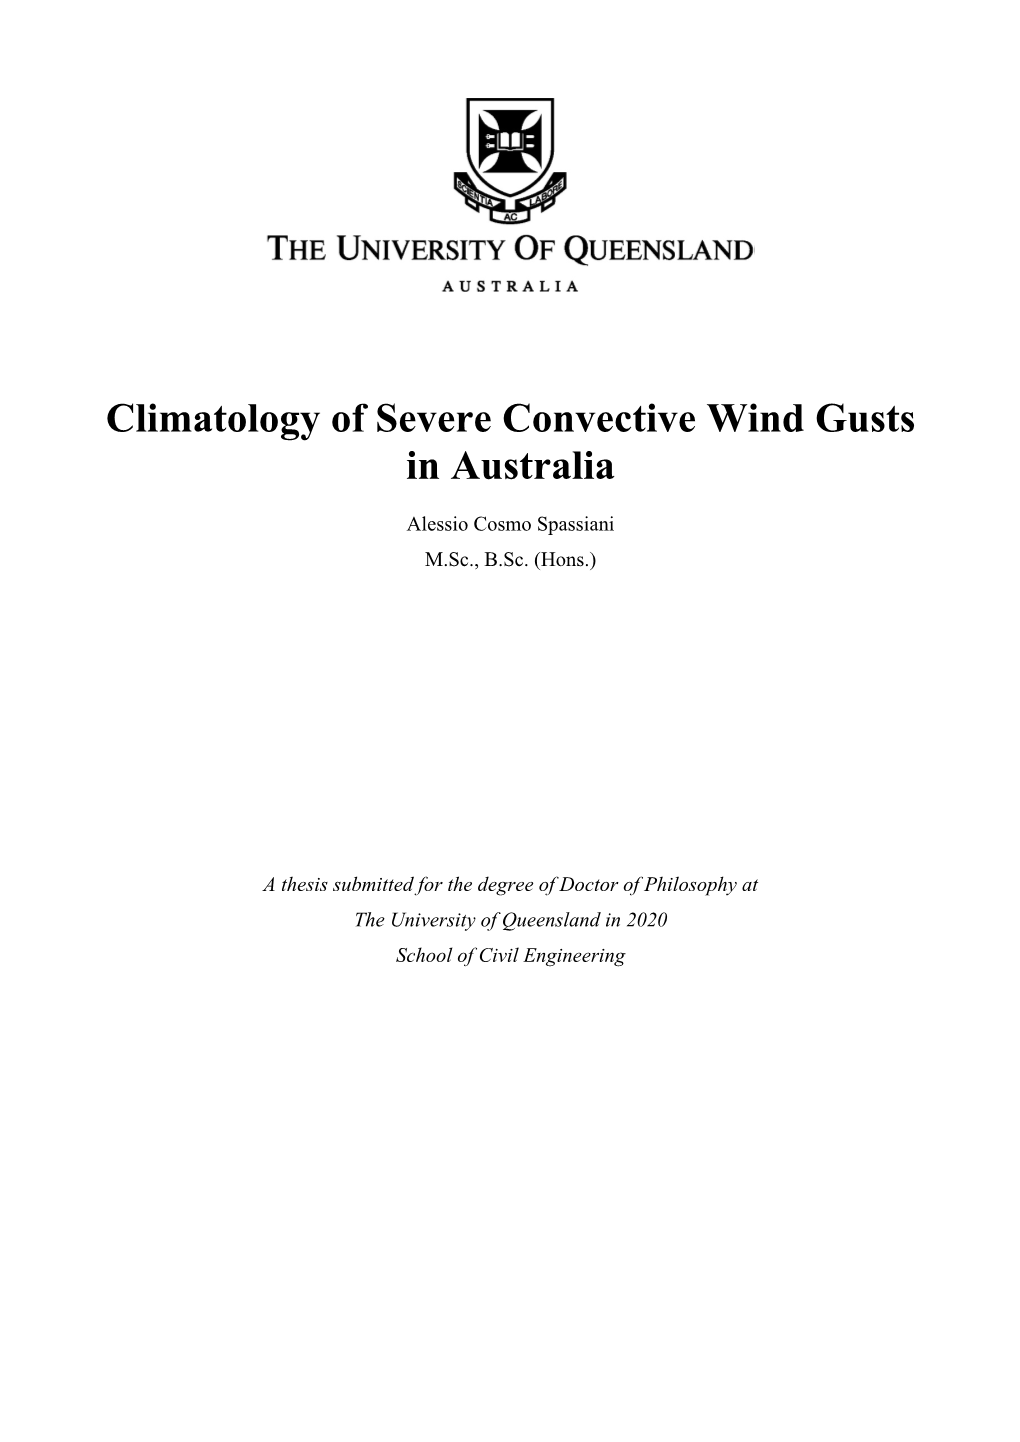 Climatology of Severe Convective Wind Gusts in Australia